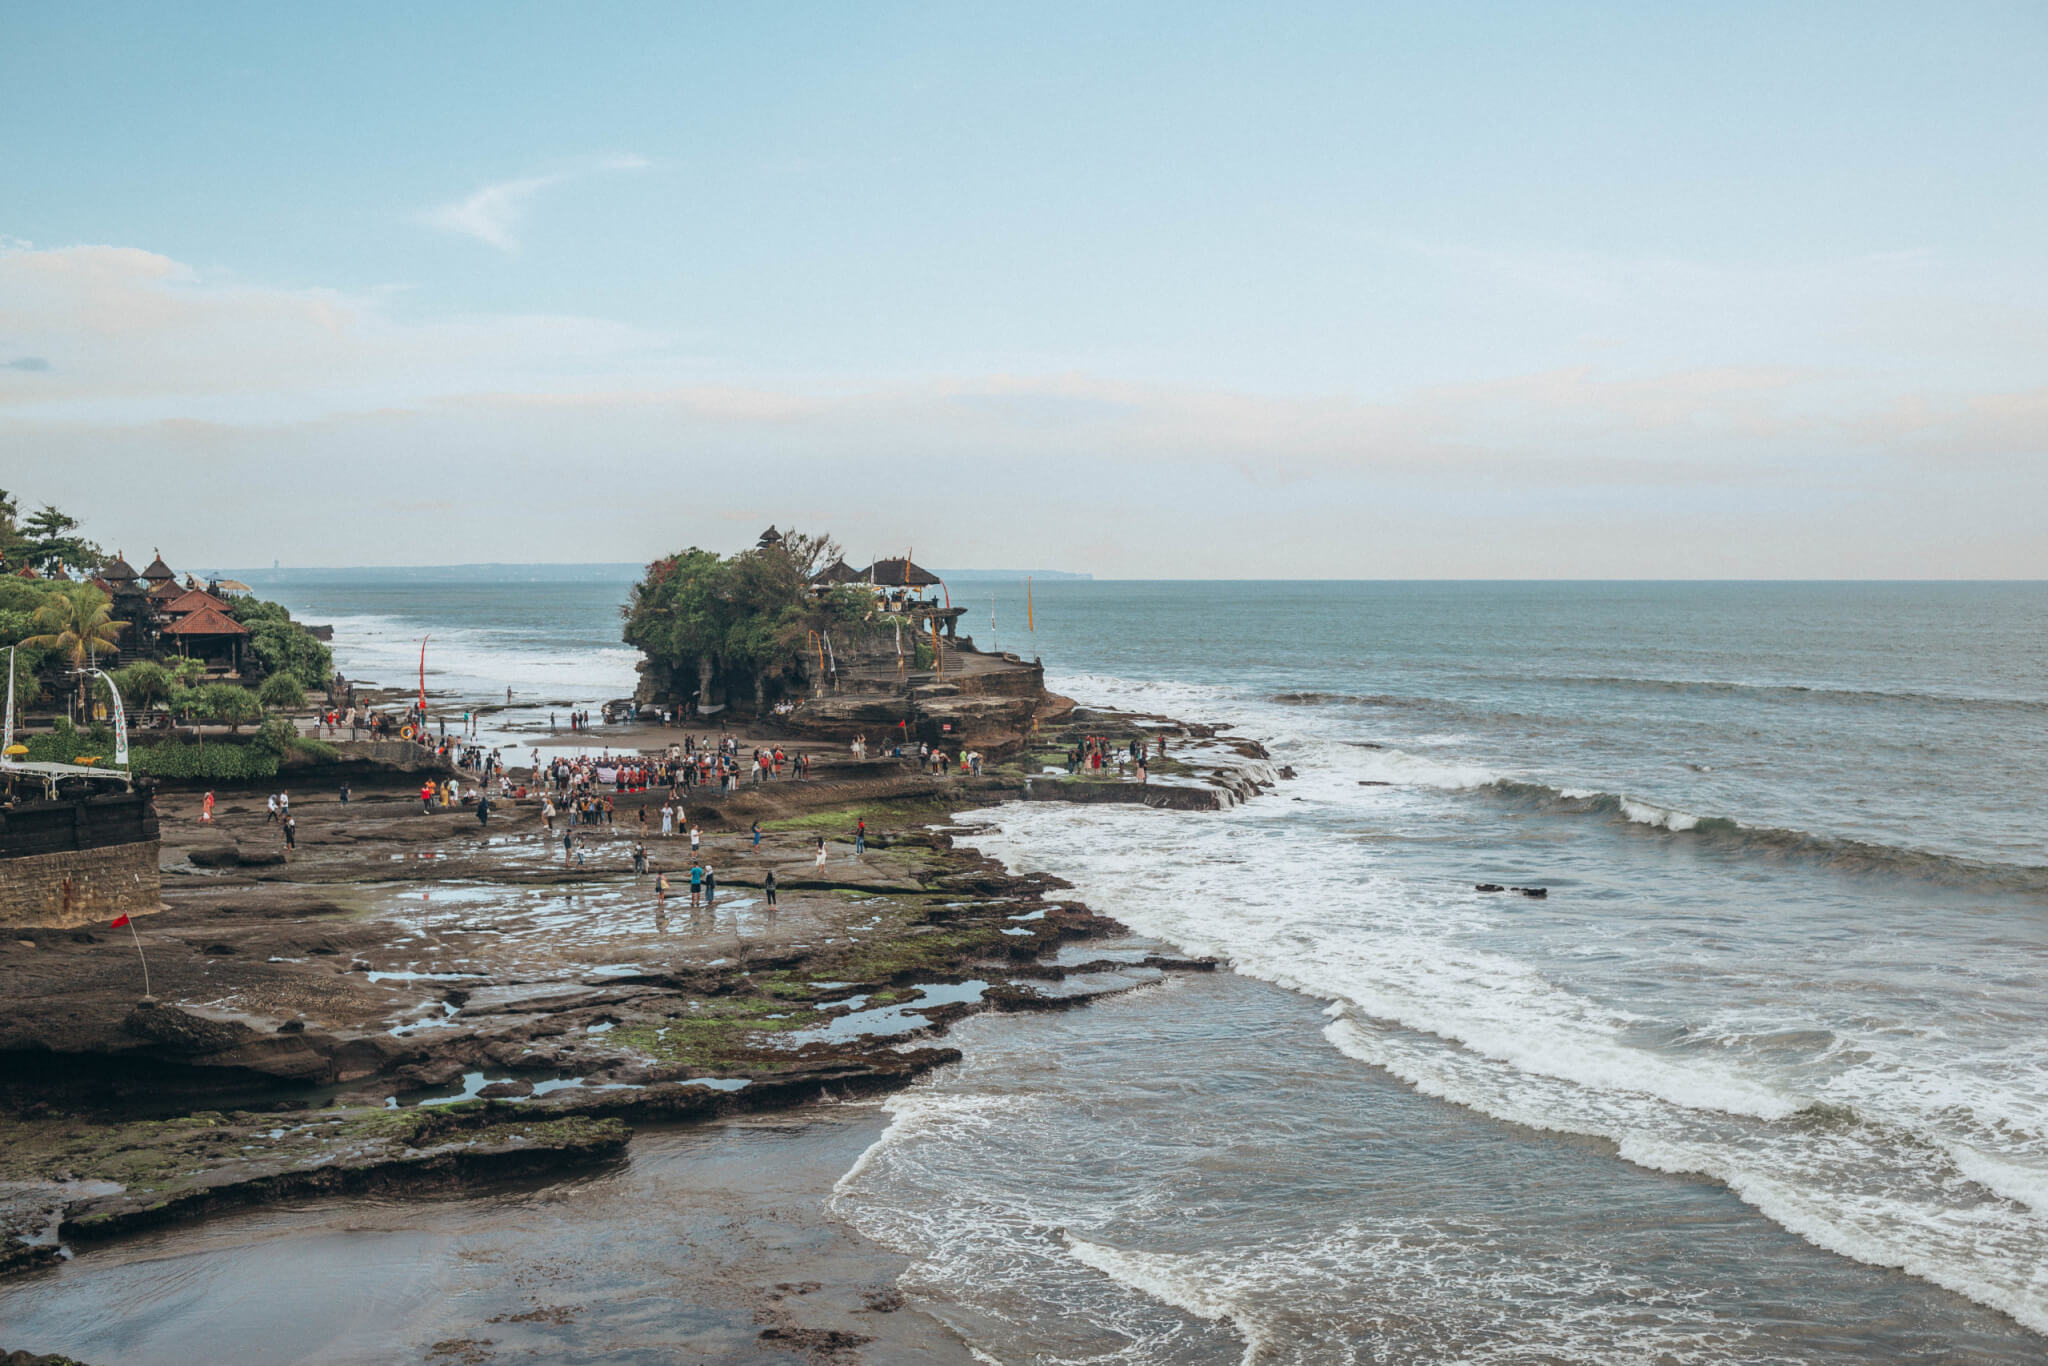 Tanah-Lot-Tour-10-of-18-scaled Explore Bali Temples with Me